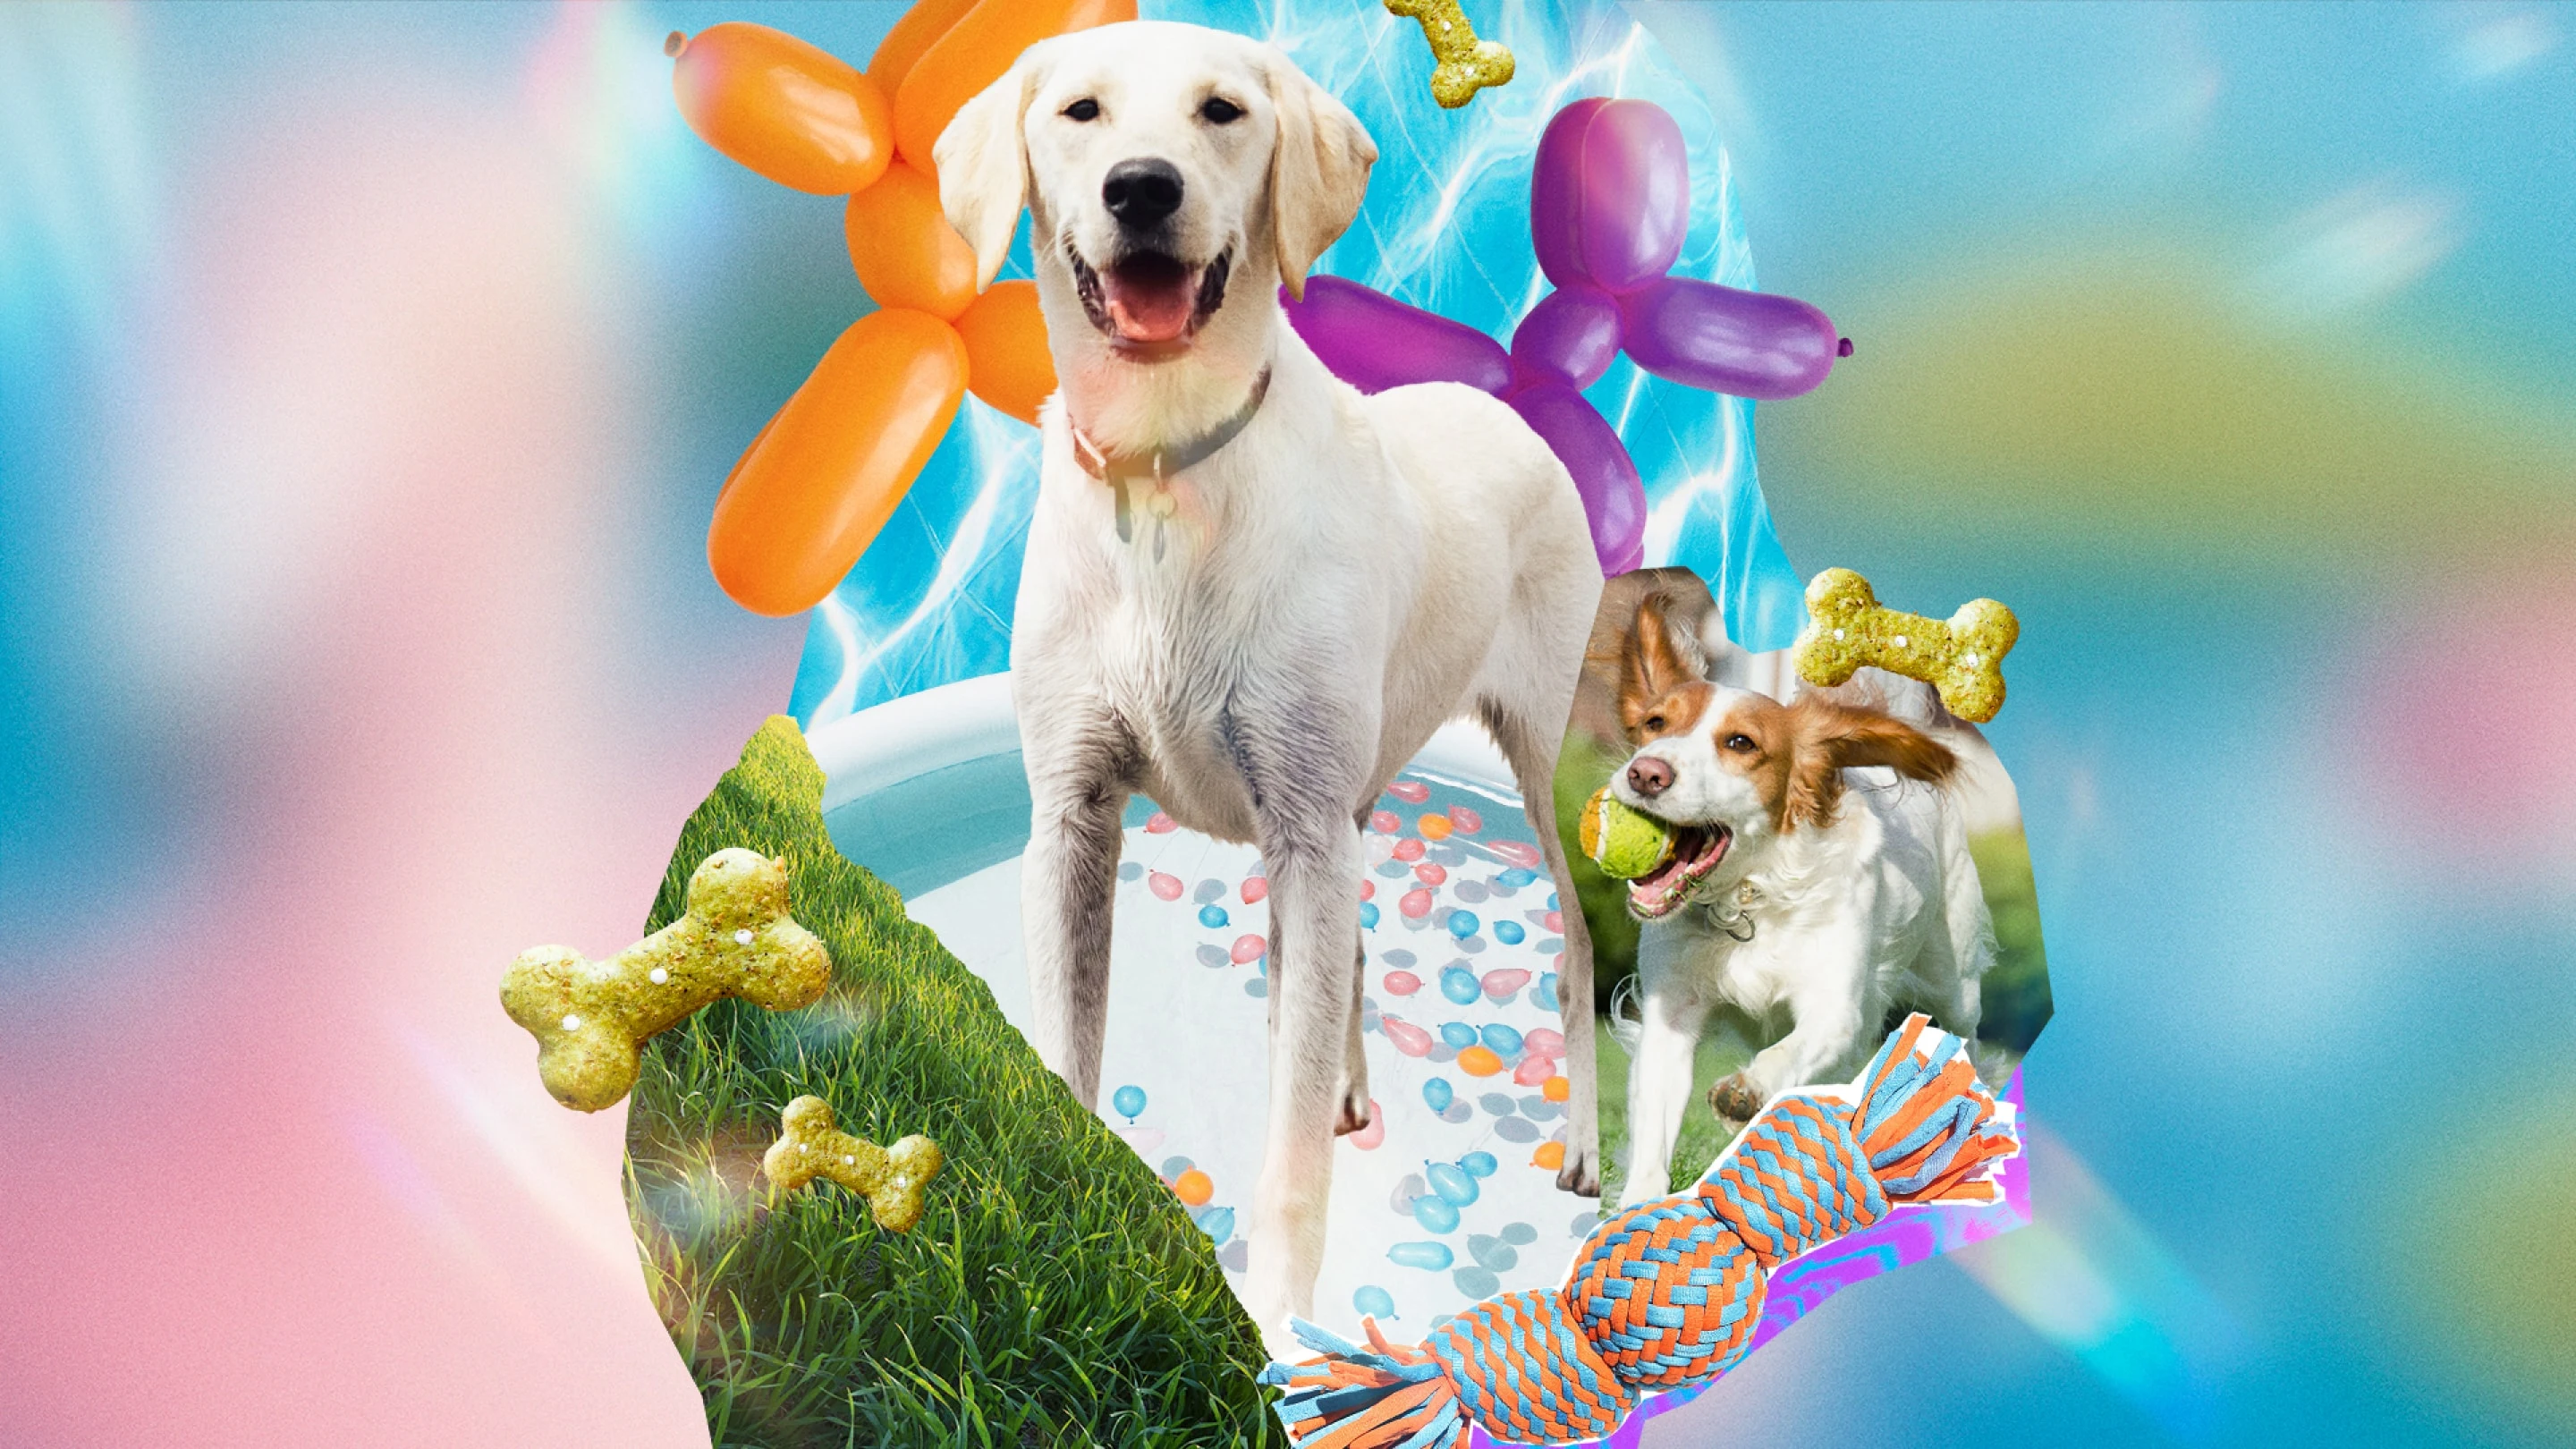 A canine-centered collage of pool-loving pups, dog treats, balloon dogs and dog toys.